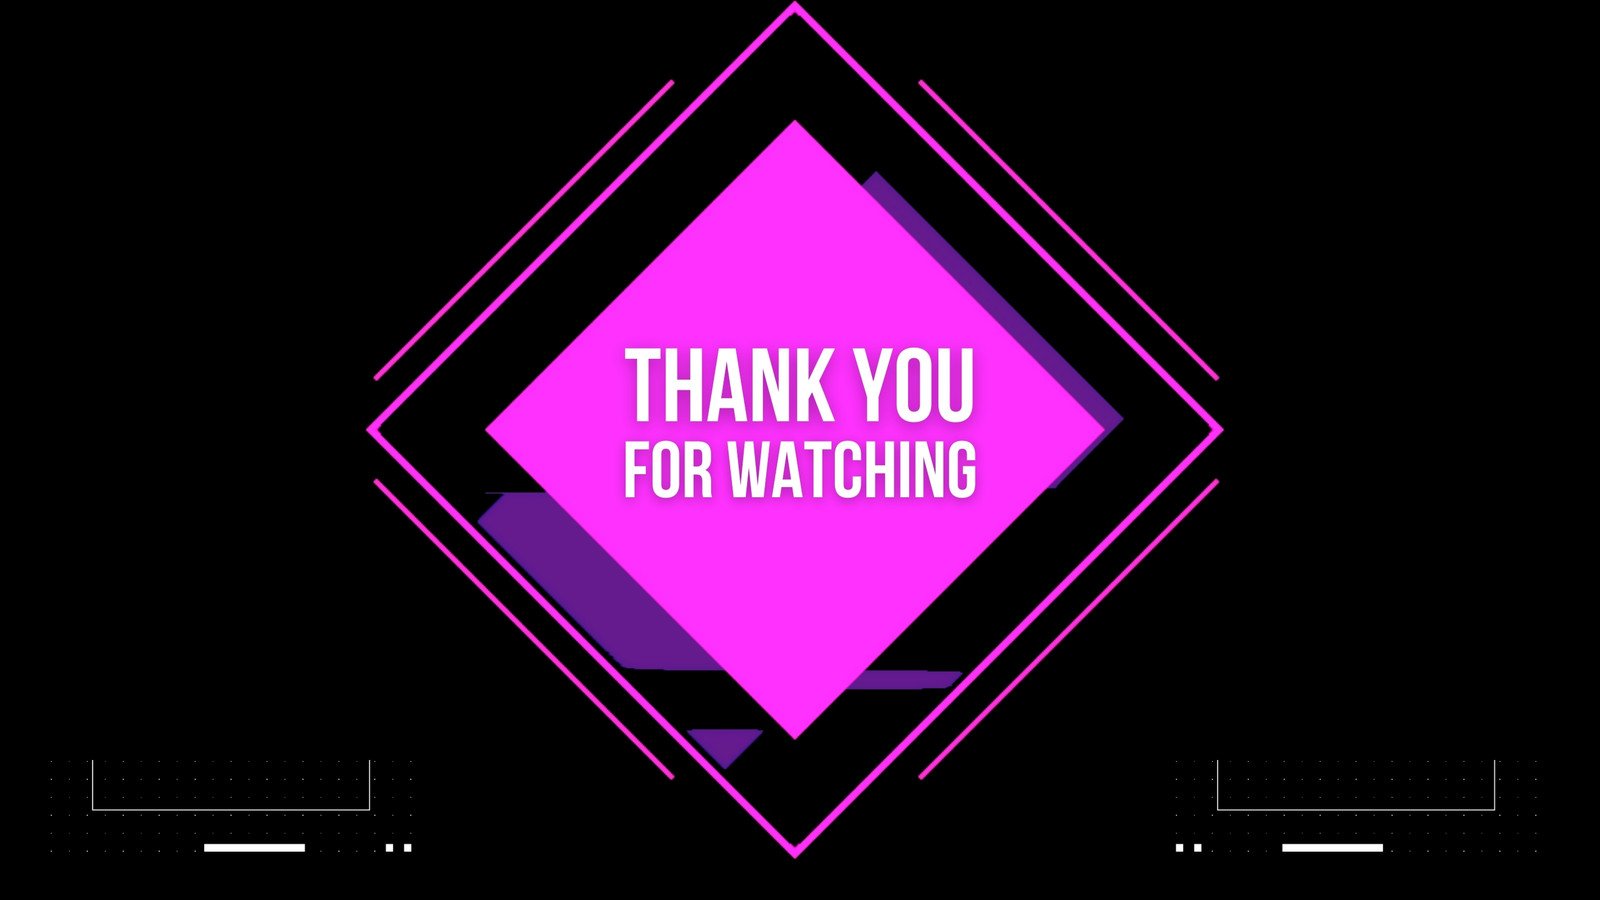 Free Thanks For Watching Video Templates To Customize Canva